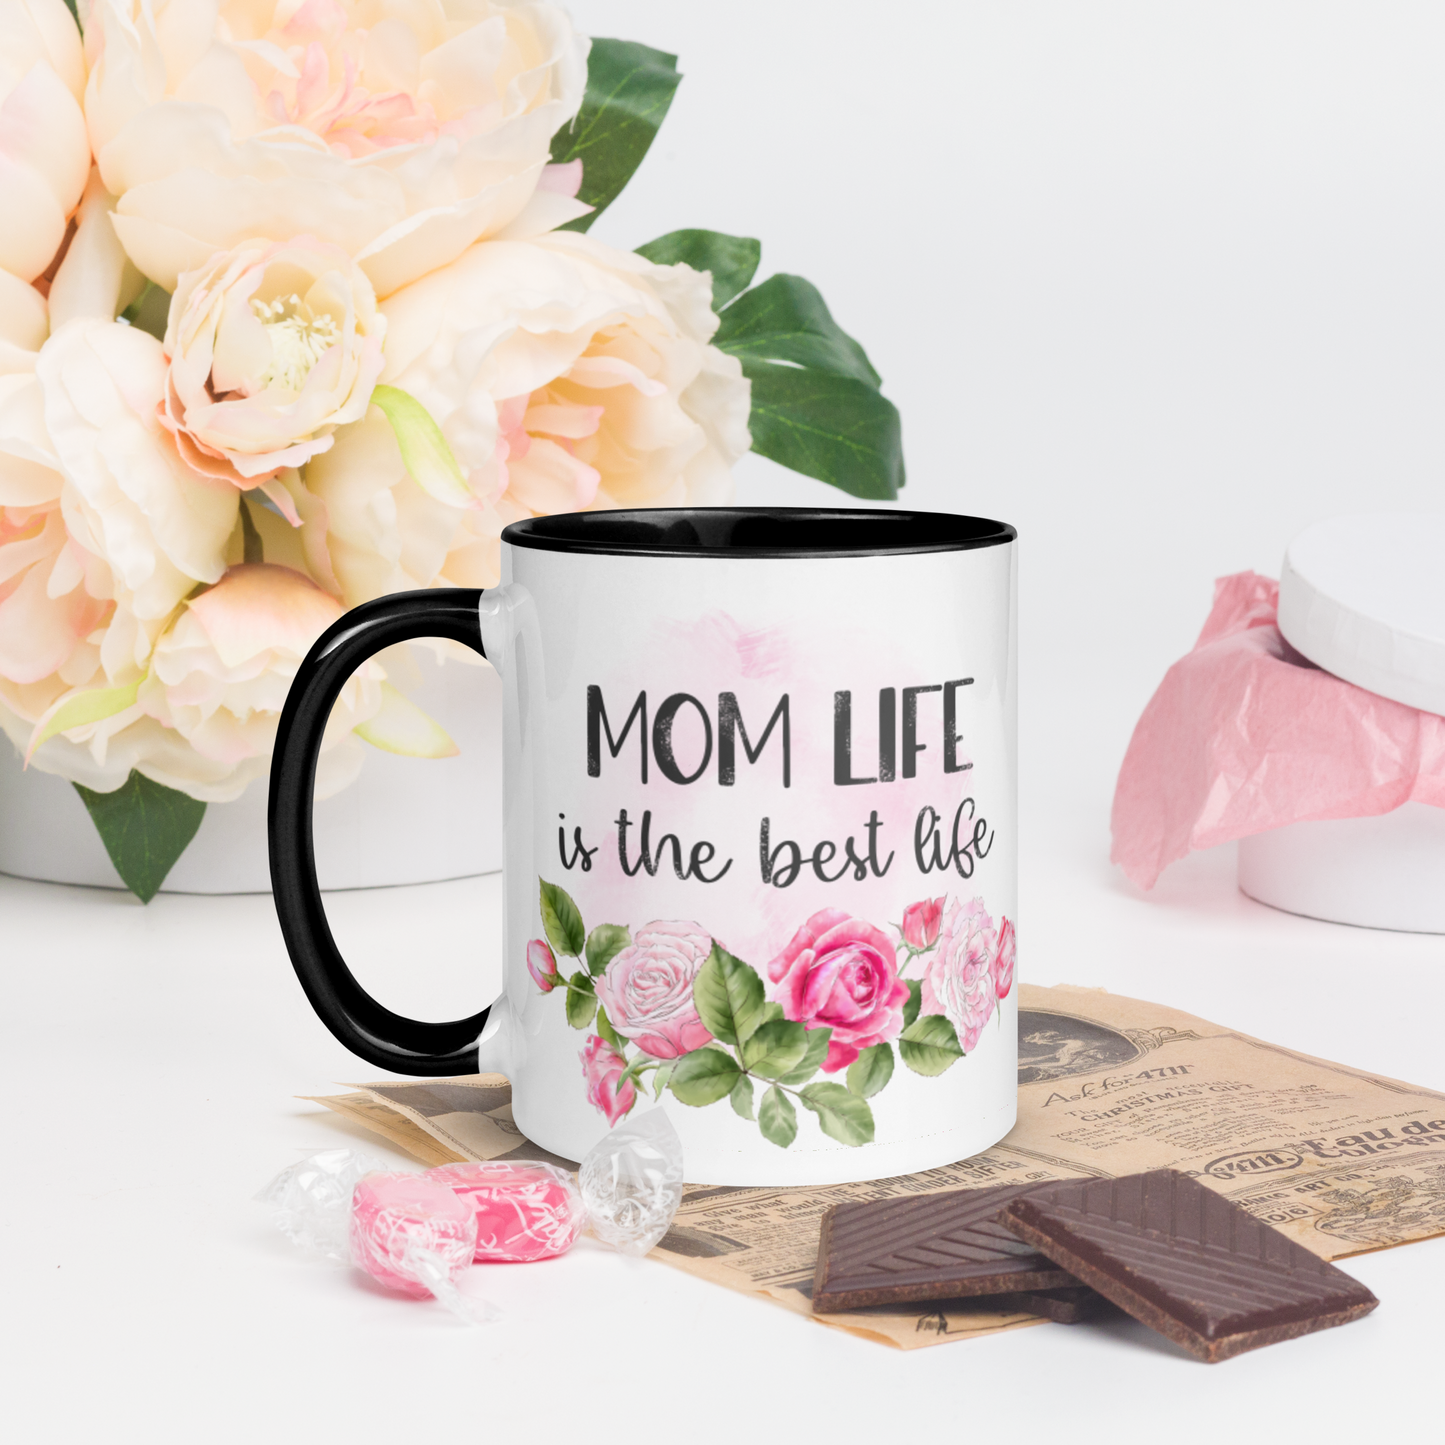 Mom Life is the Best Life ❤️ Ceramic Mug with Color Accent (Available in Various Colors!)